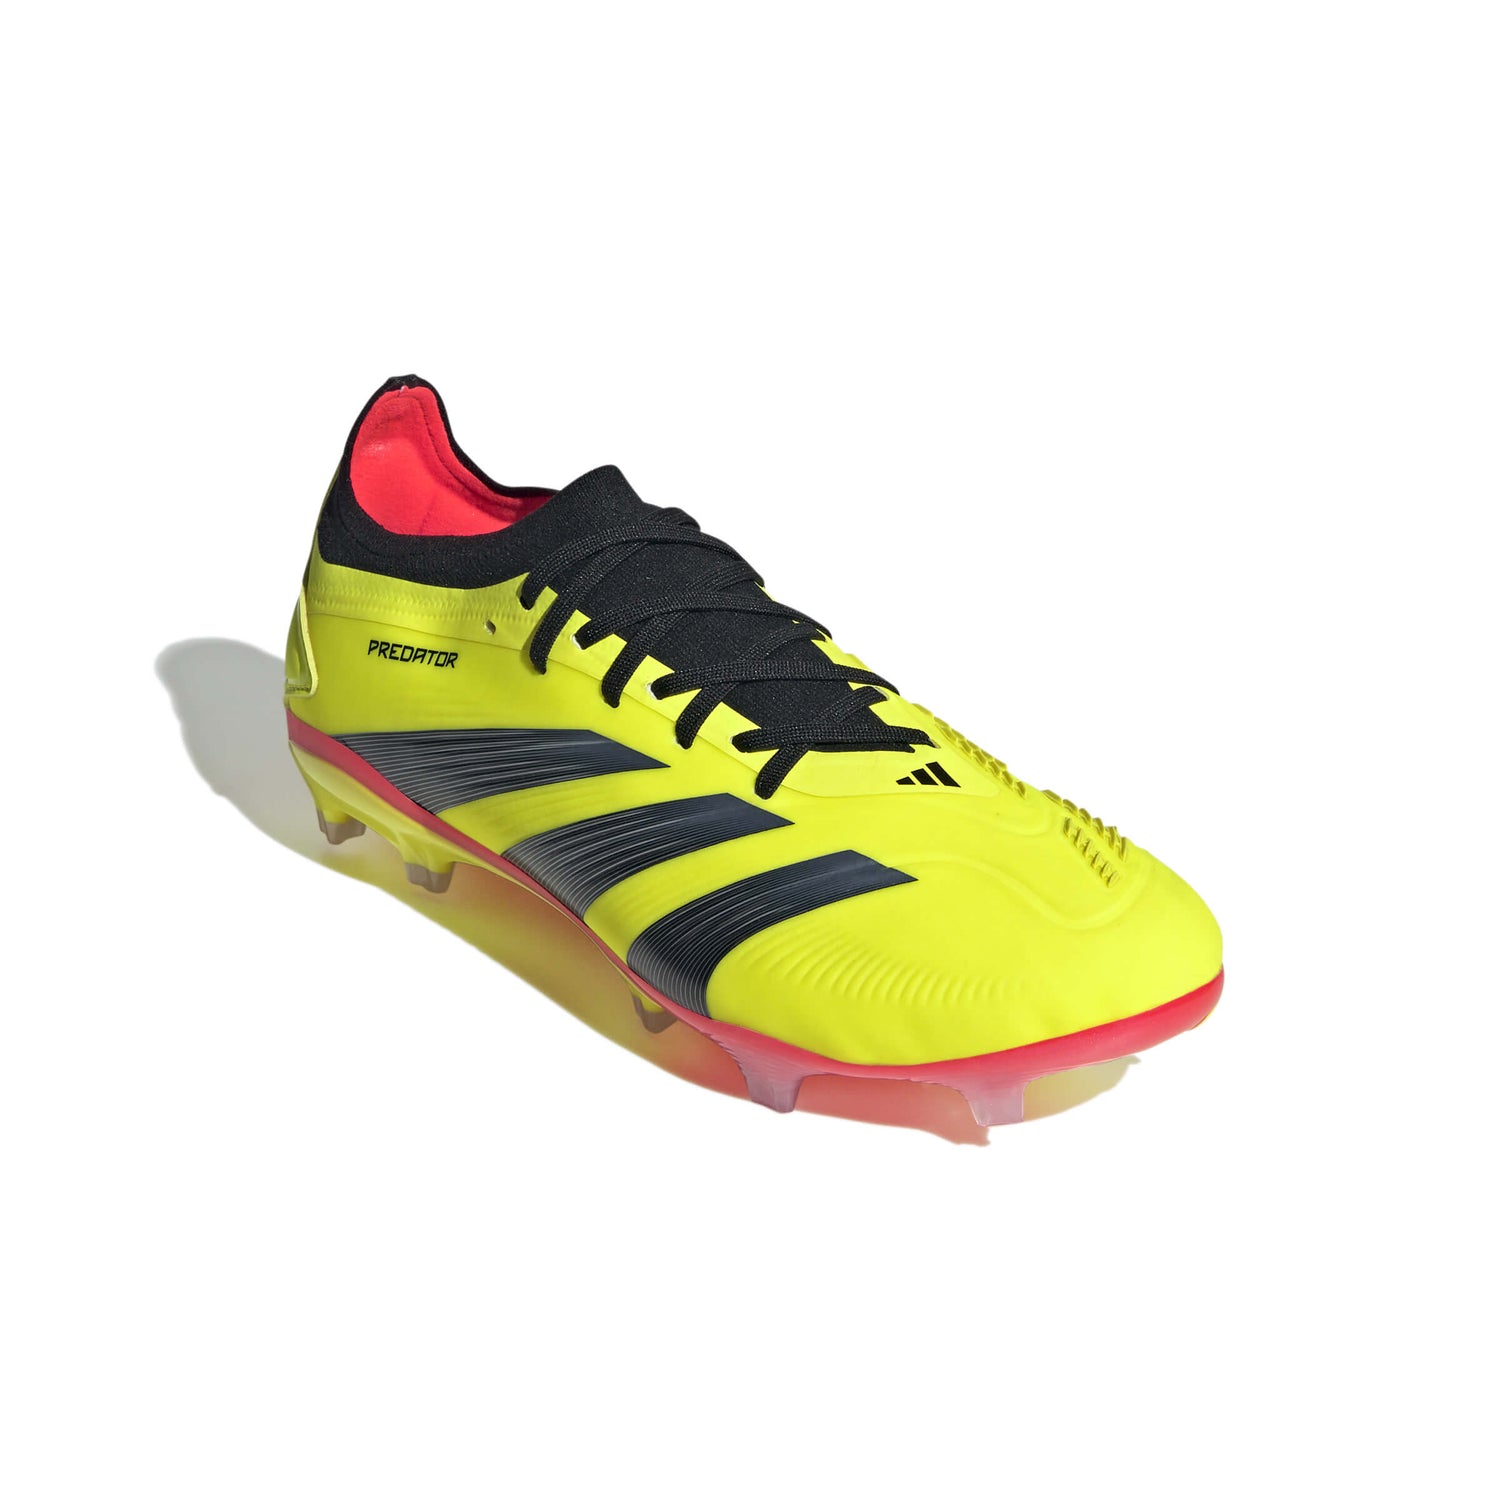 adidas Predator Pro FG - Energy Citrus Pack (SP24) (Lateral - Front)